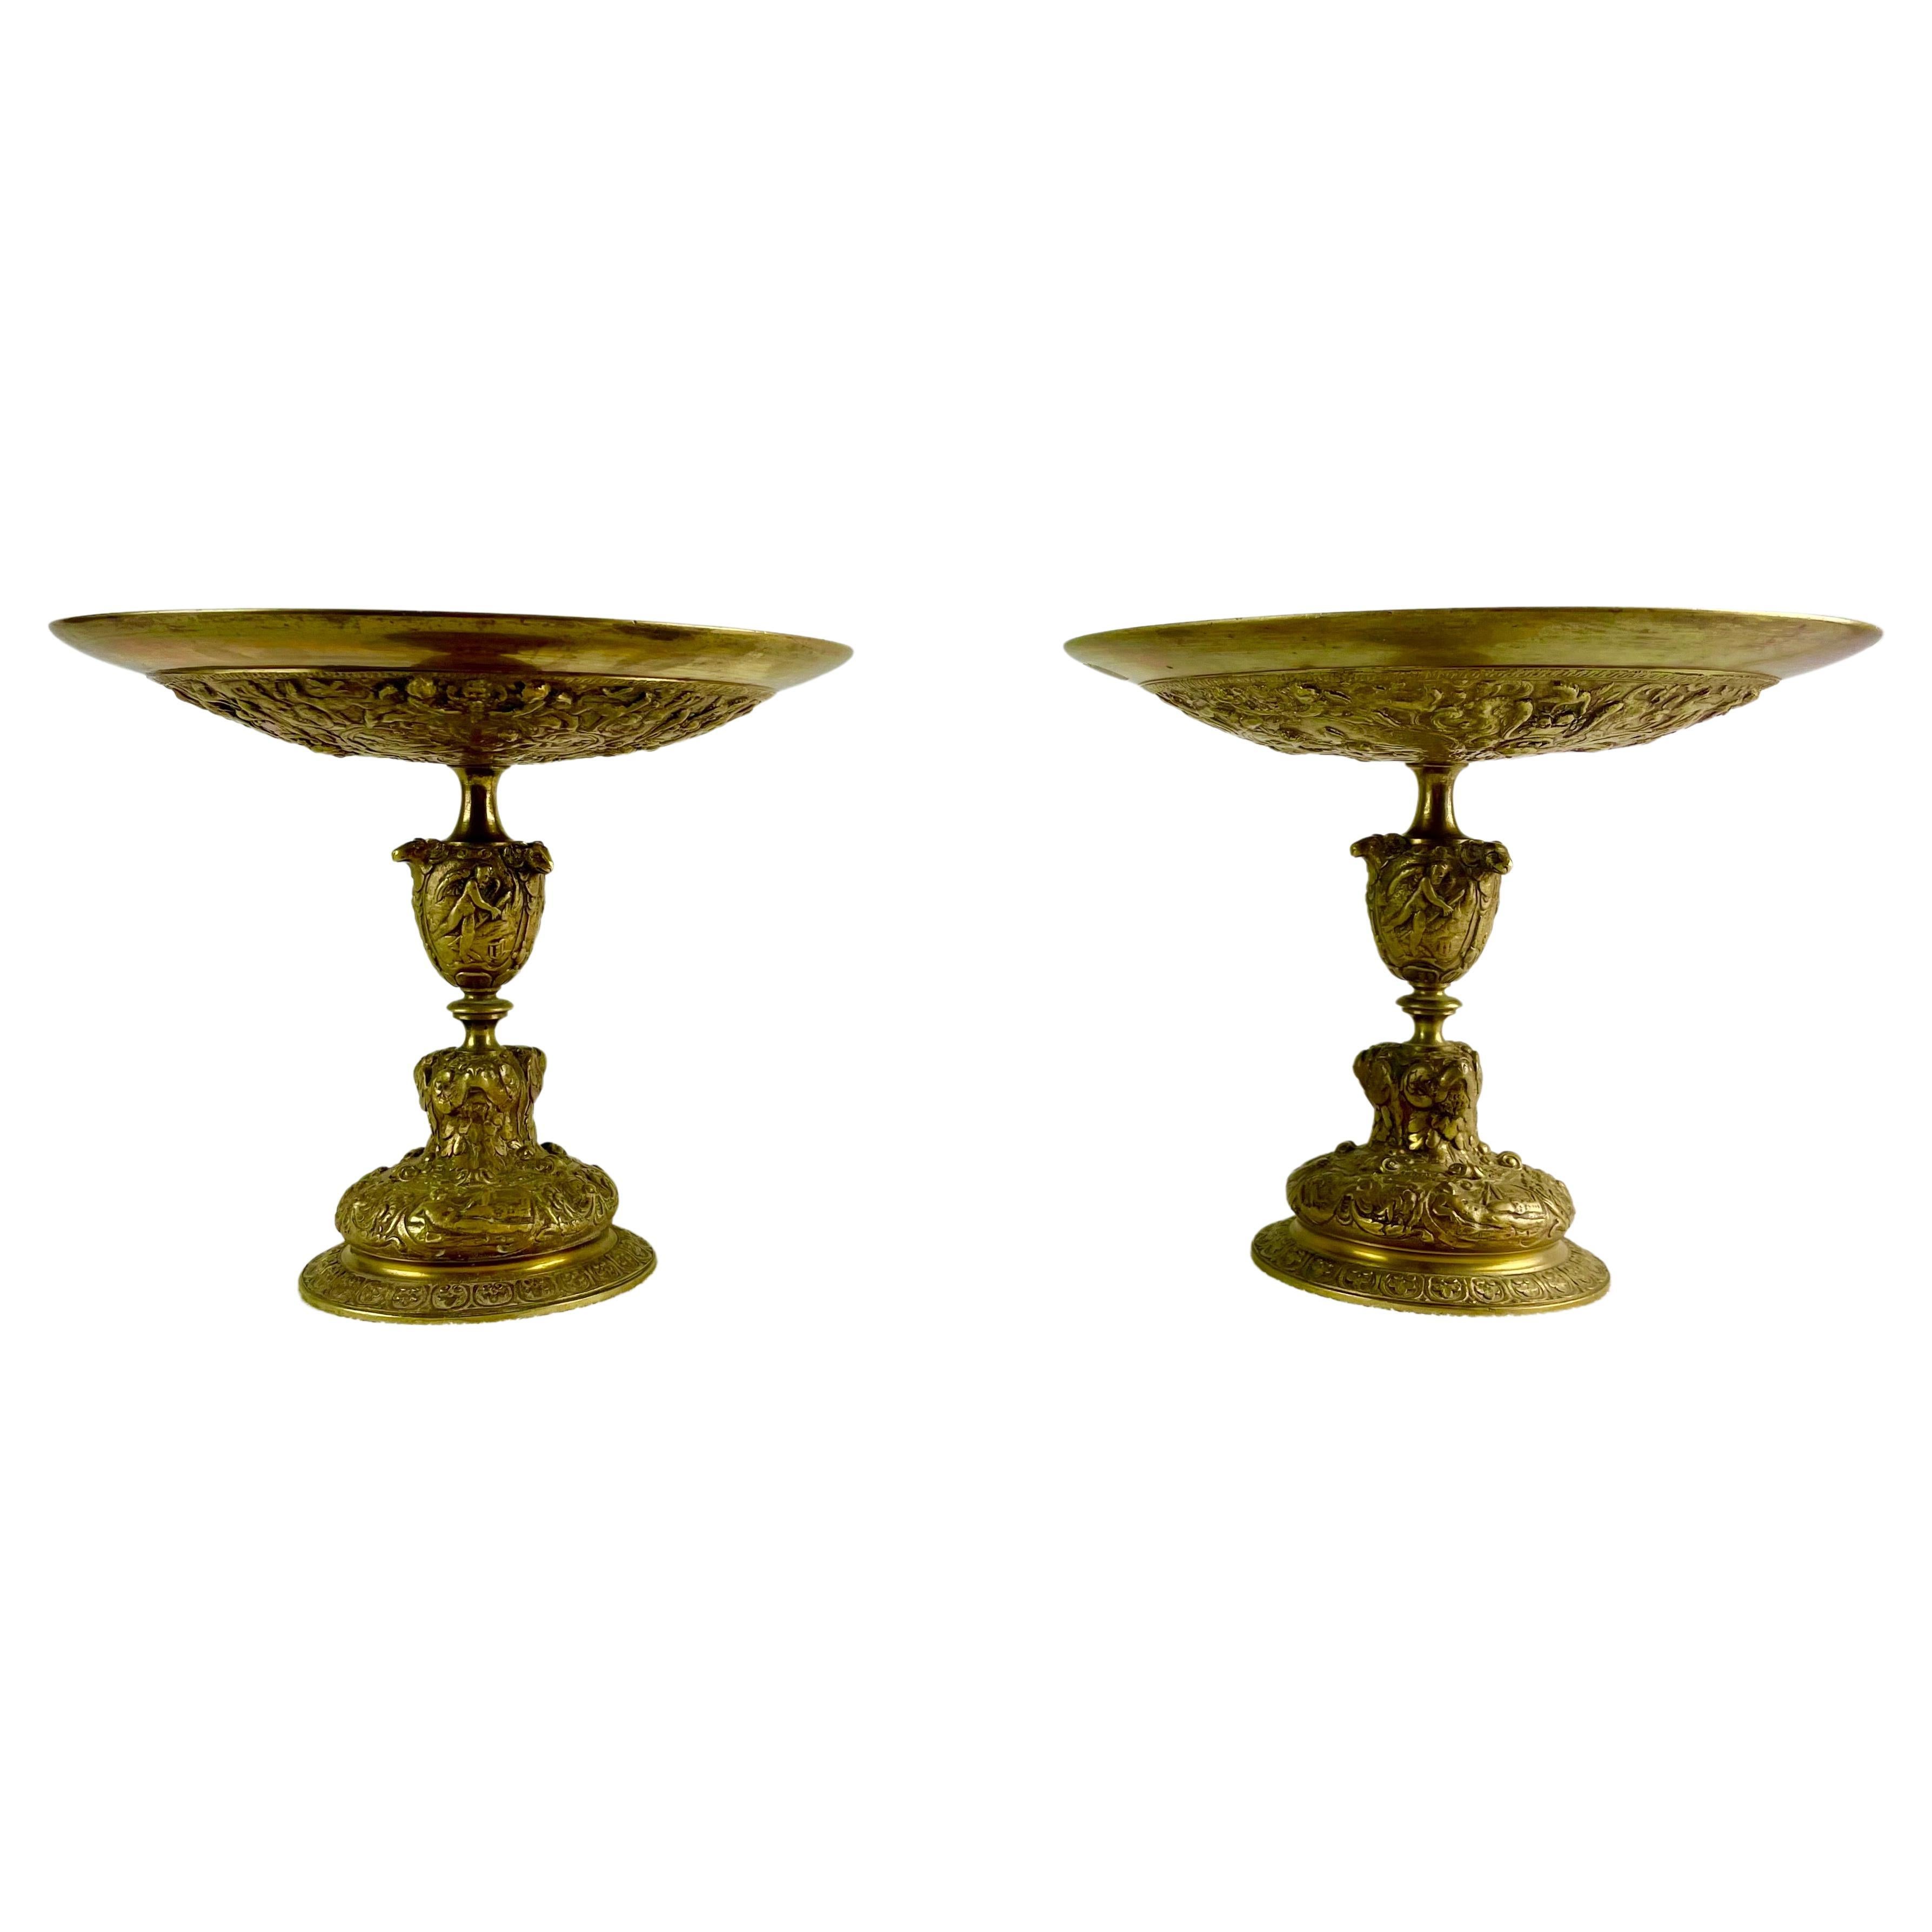 Very nice pair of Renaissance style tazza cups in richly chiseled gilt bronze.
This pair of cups comes from a French private collection. They are products of the second half of the 19th century, at a time when the history of the Middle Ages and the